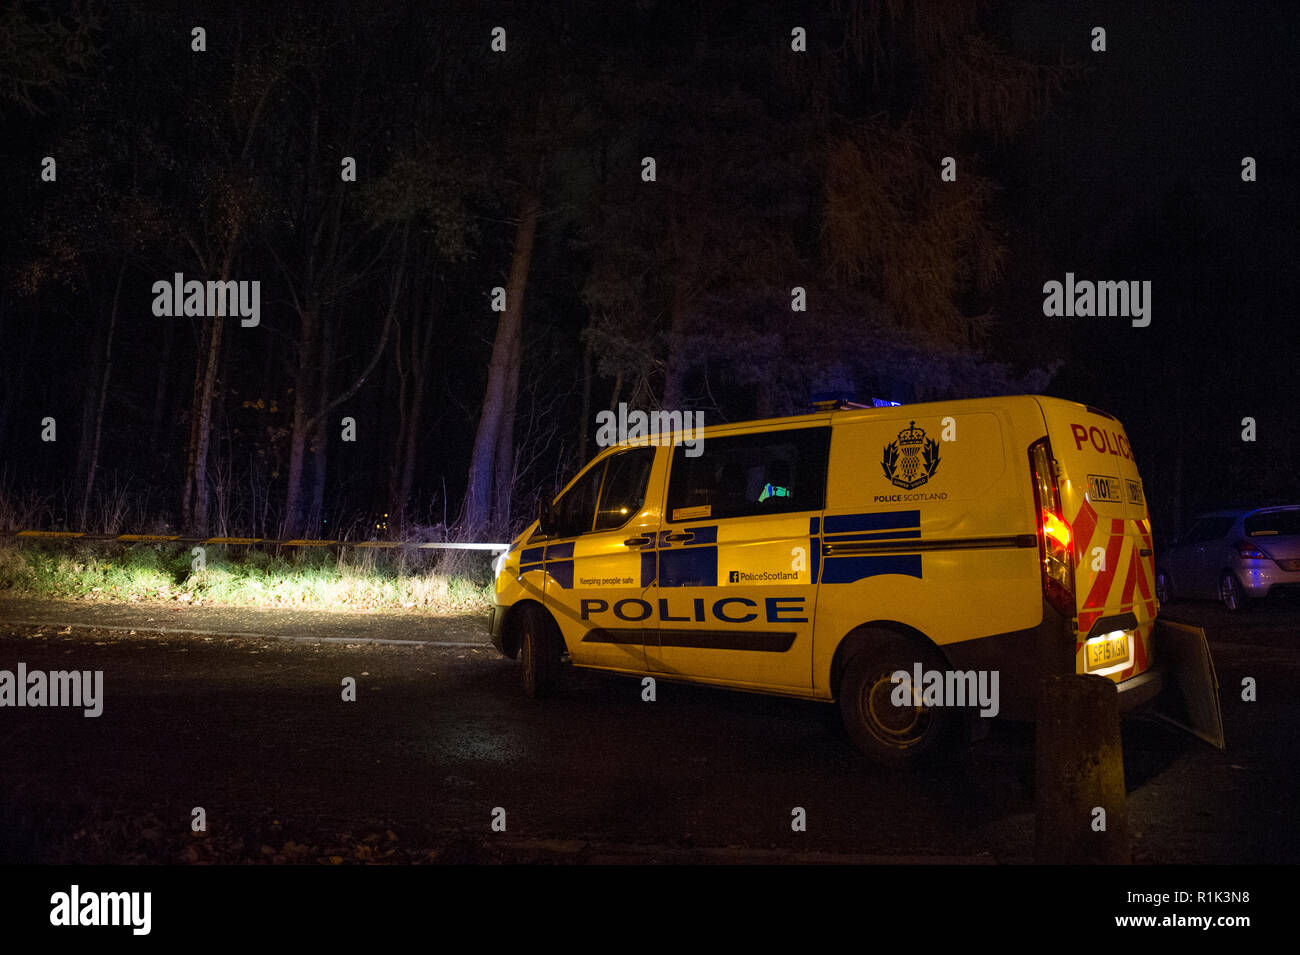 Cumbernauld, UK. 13th Nov, 2018. Police Incident of a suspected attack in the Seafar area of Cumbernauld at 8pm. Police have cordoned off the area with tape and are investigating but not giving any details out. One person has been taken away in an ambulance with the blue lights and siren on.  A car remains on the scene along with a heavily wooded area cordoned off for investigation. Around 5 officers, 2 police units and an ambulance were in attendance.  Credit: Colin Fisher/Alamy Live News Stock Photo